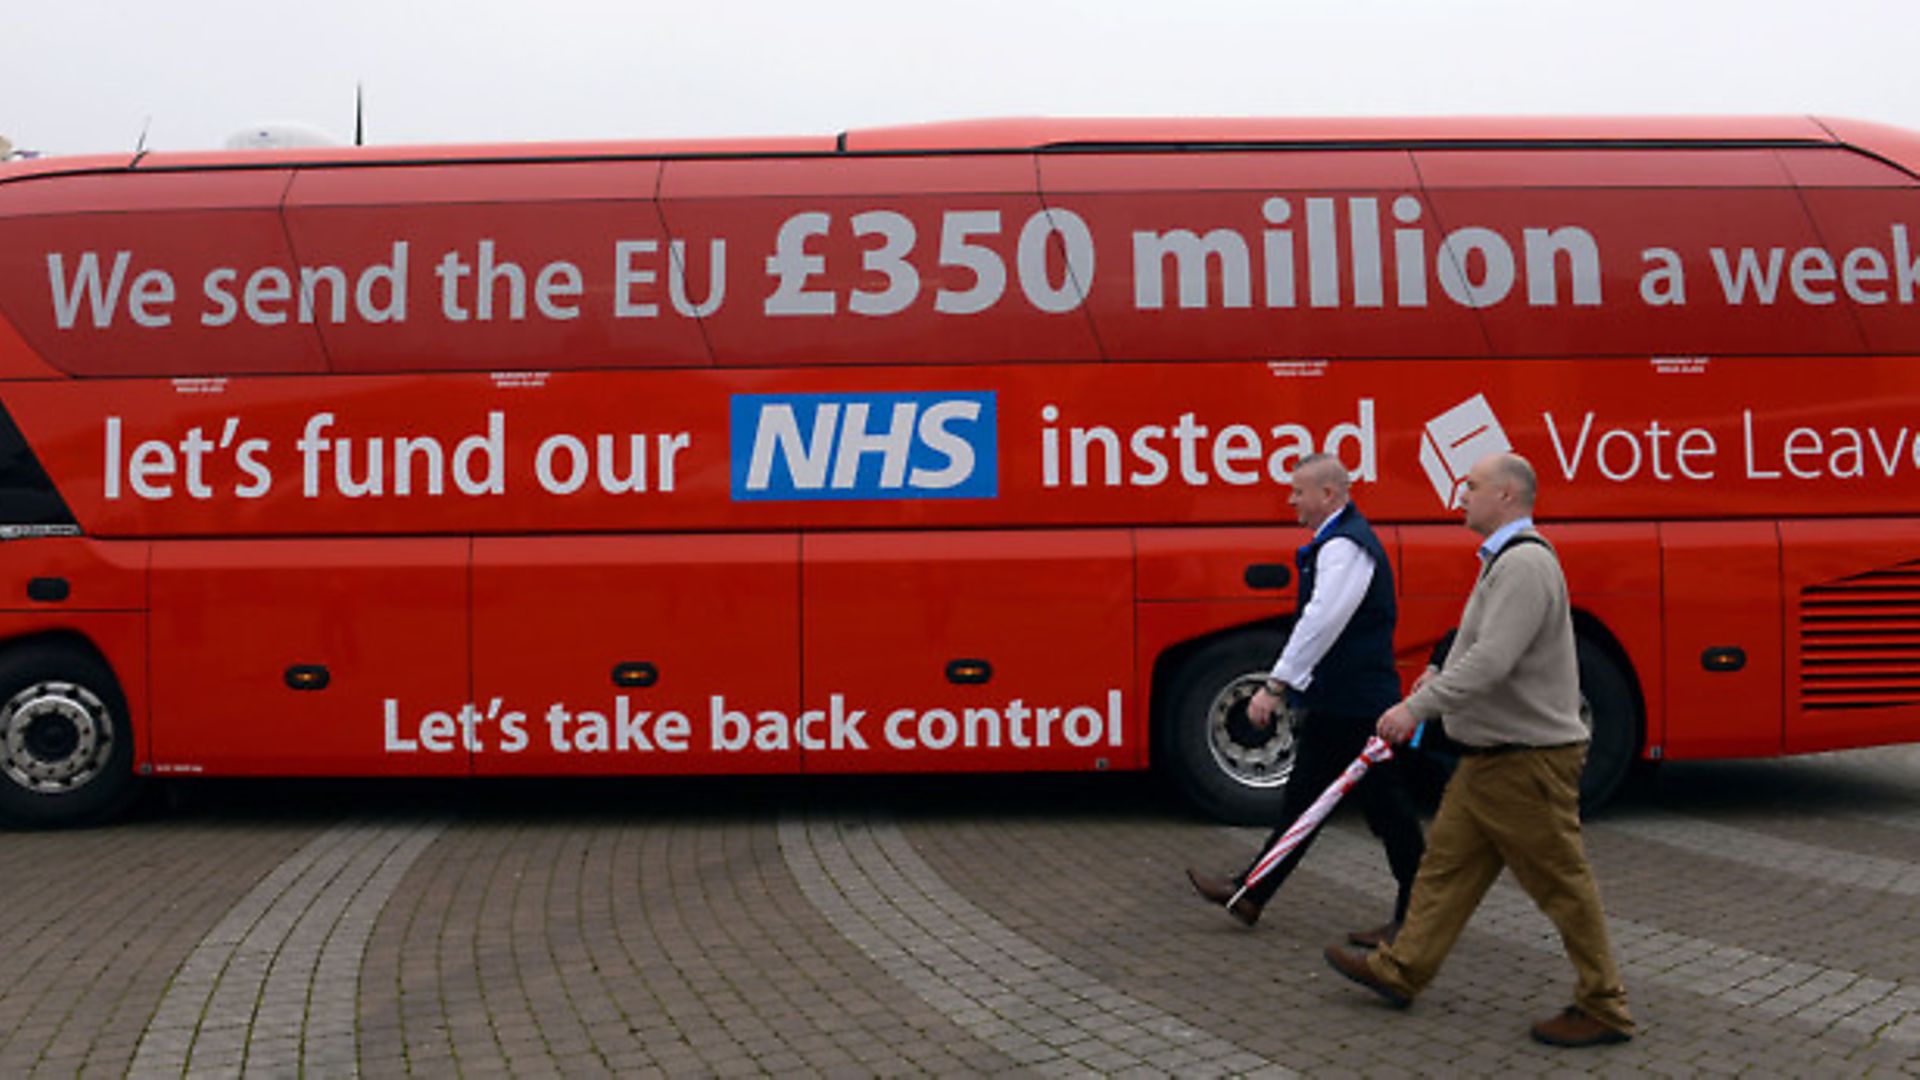 The Vote Leave campaign bus. - Credit: PA Wire/PA Images